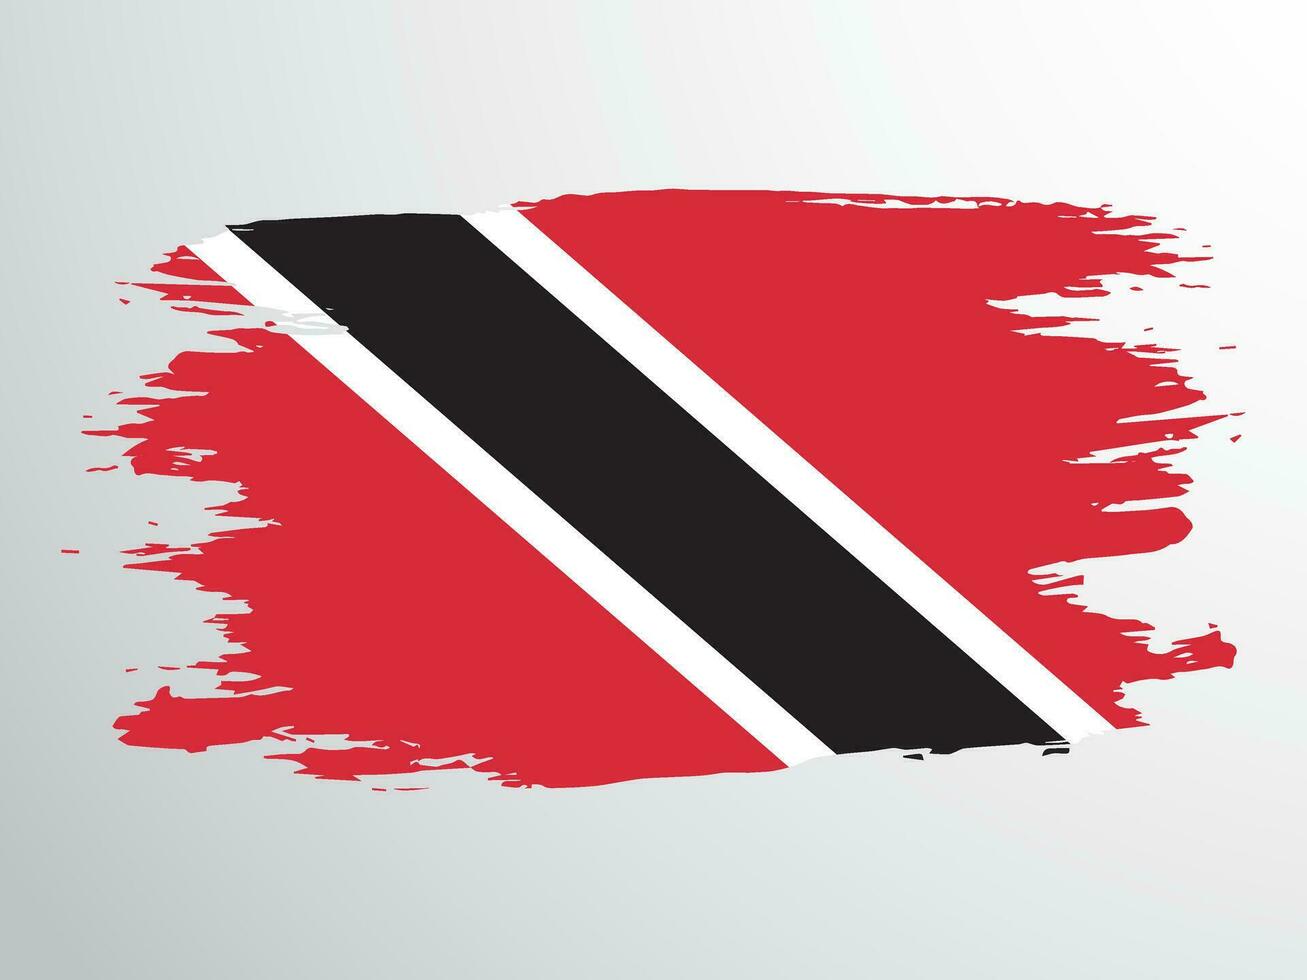 Flag of Trinidad and Tobago painted with a brush vector